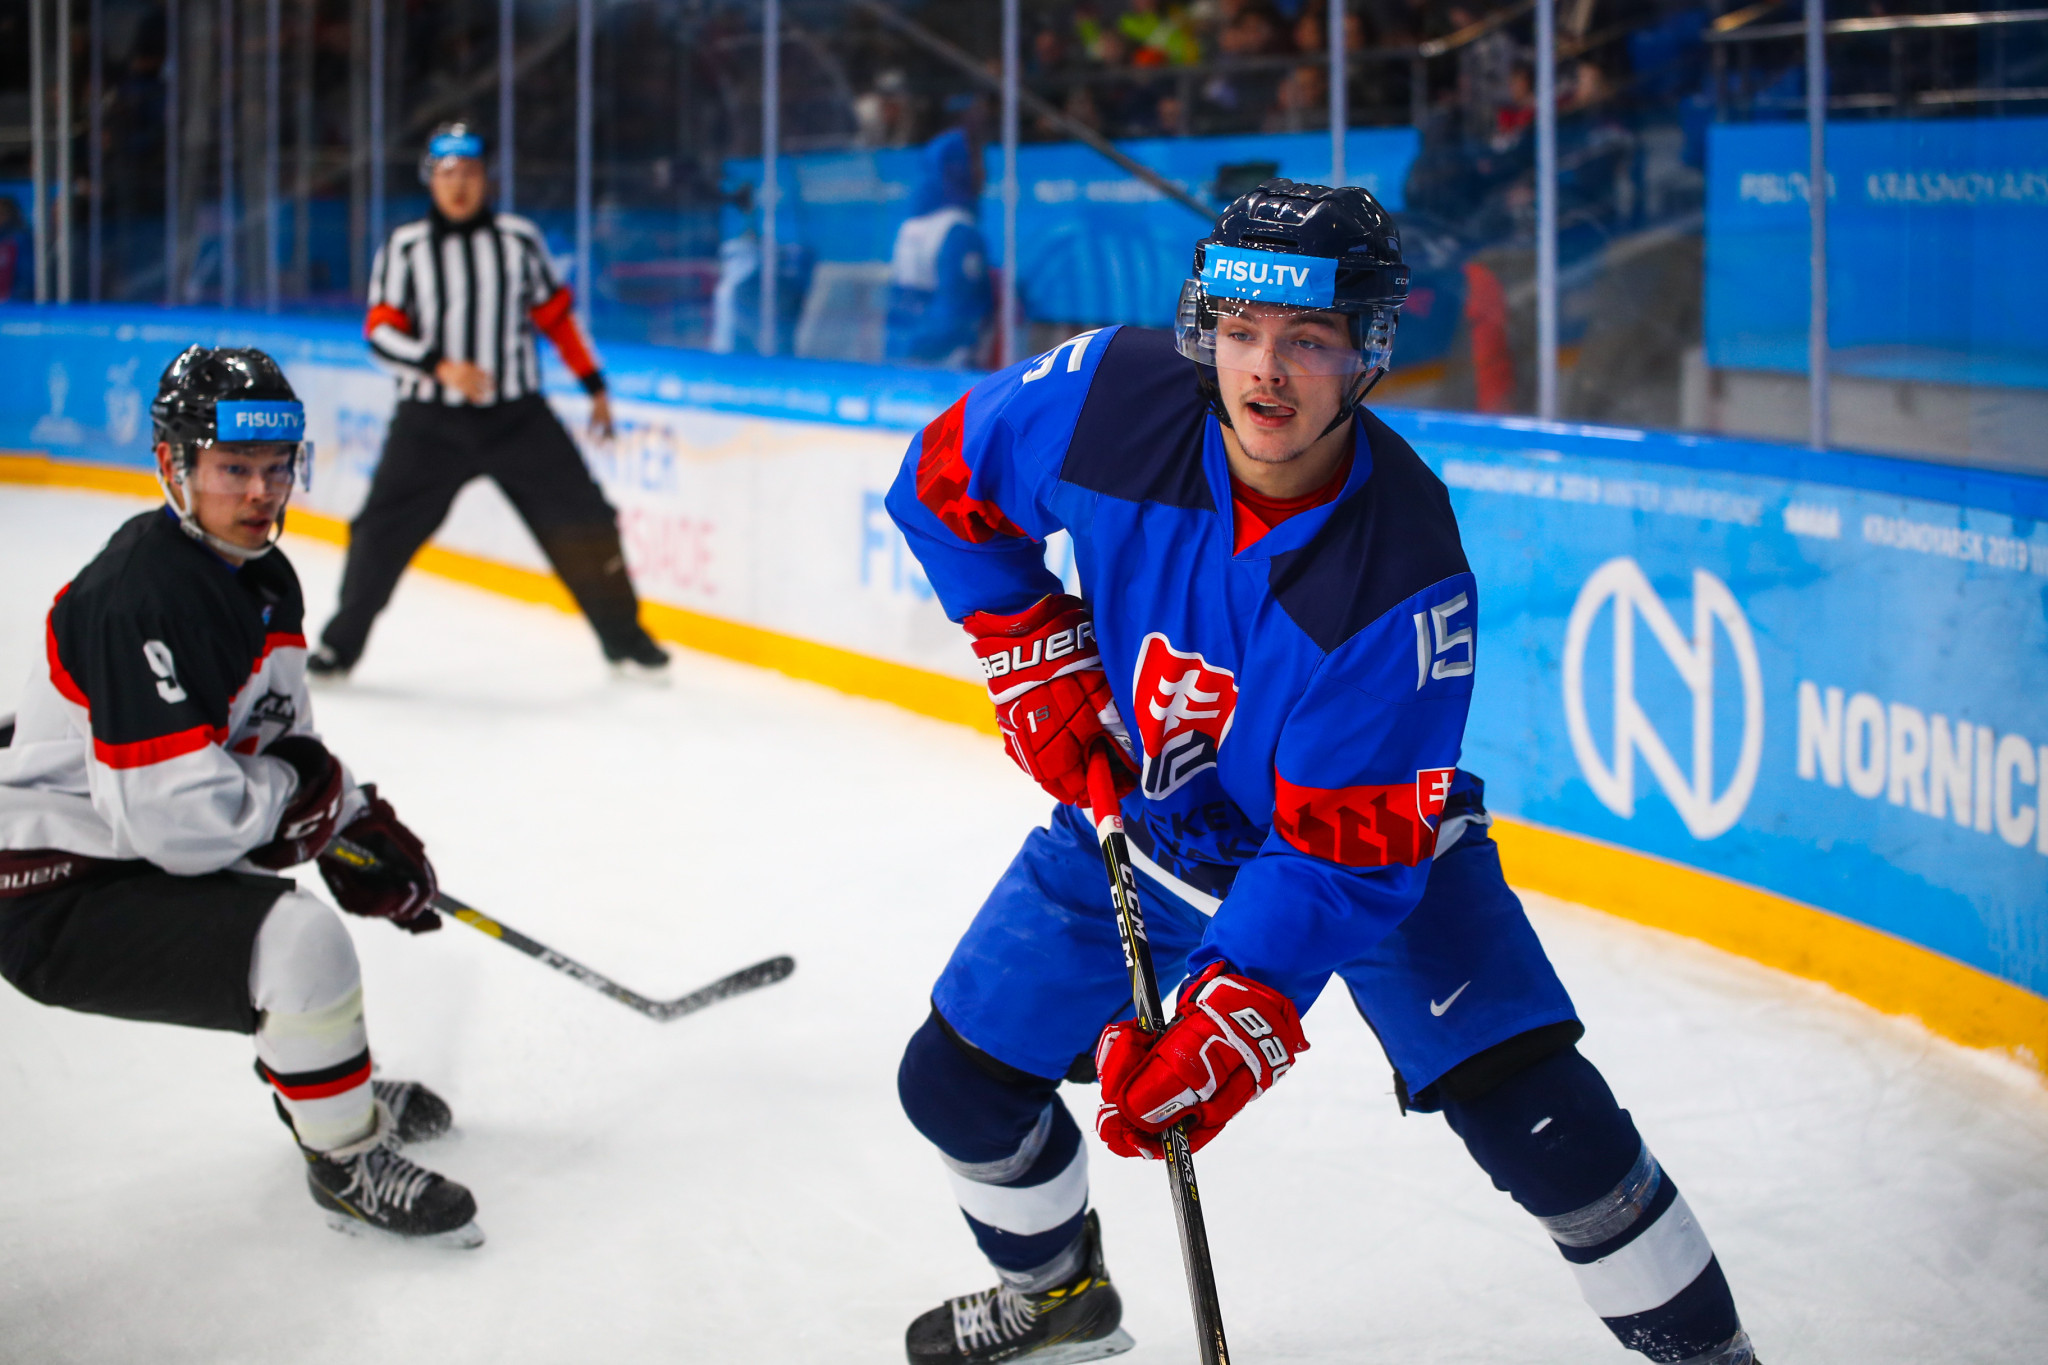 Slovakia defeated Japan 8-3 in ice hockey to top Group A in the men's competition ©Krasnoyarsk 2019